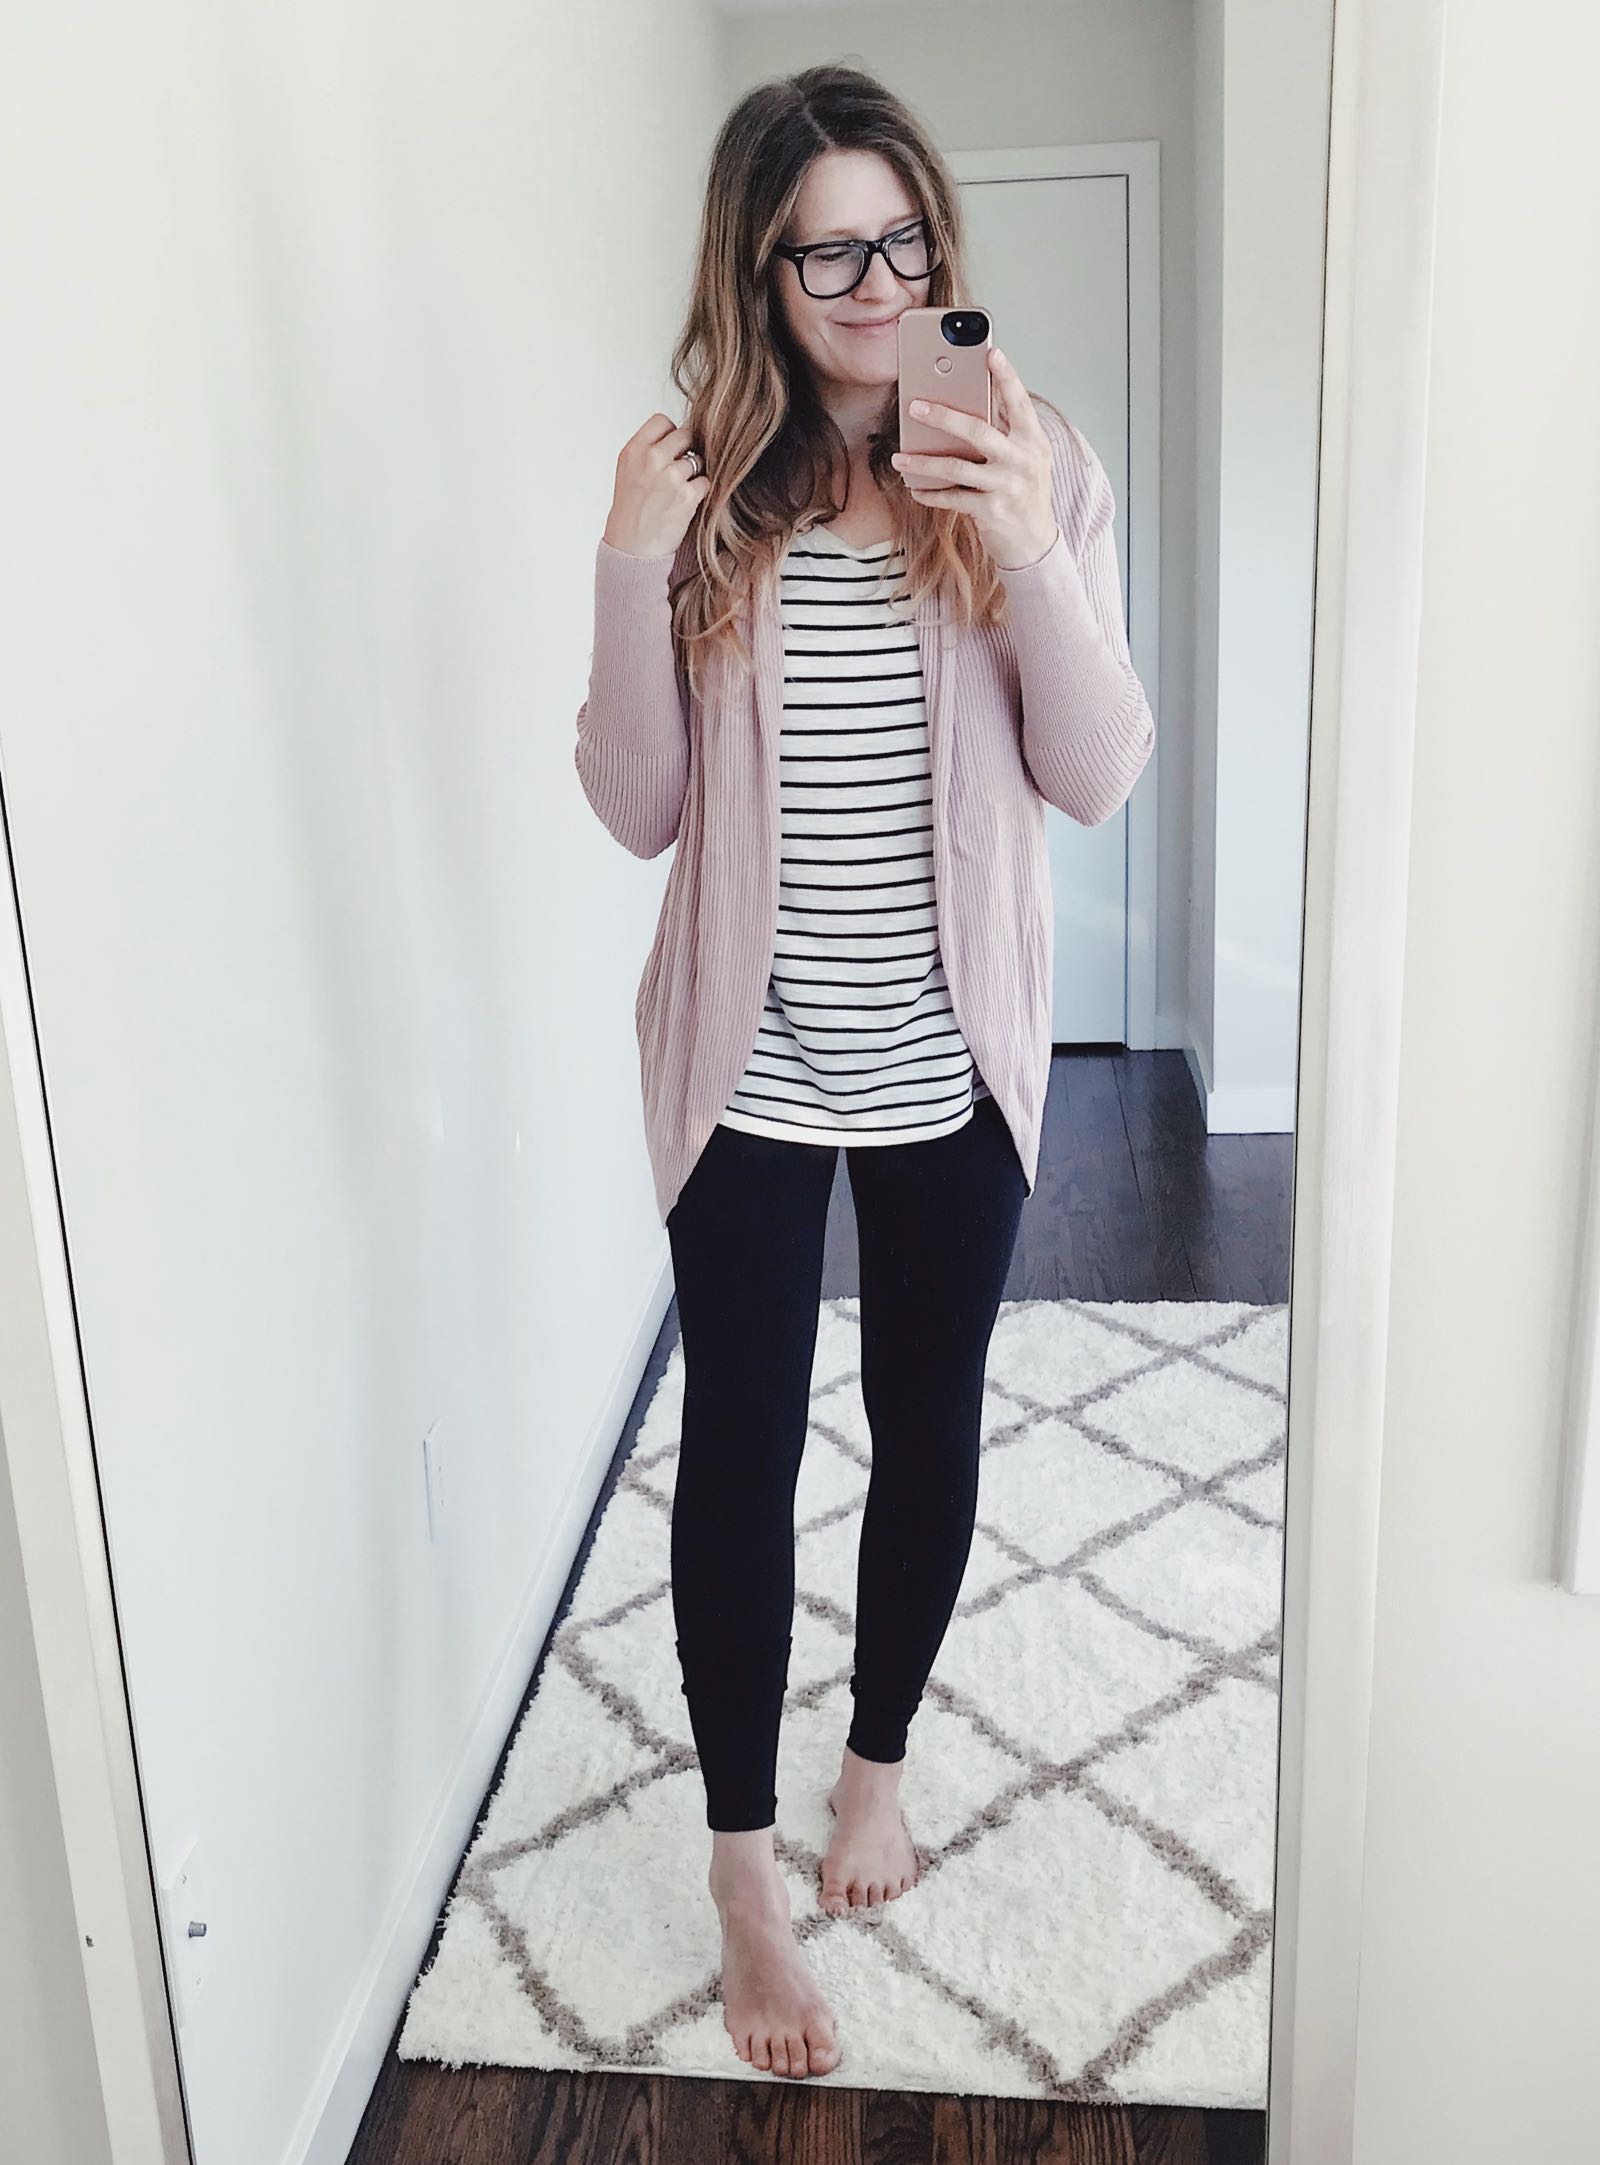 Nordstrom Anniversary Sale - budget buys and easy outfit ideas!